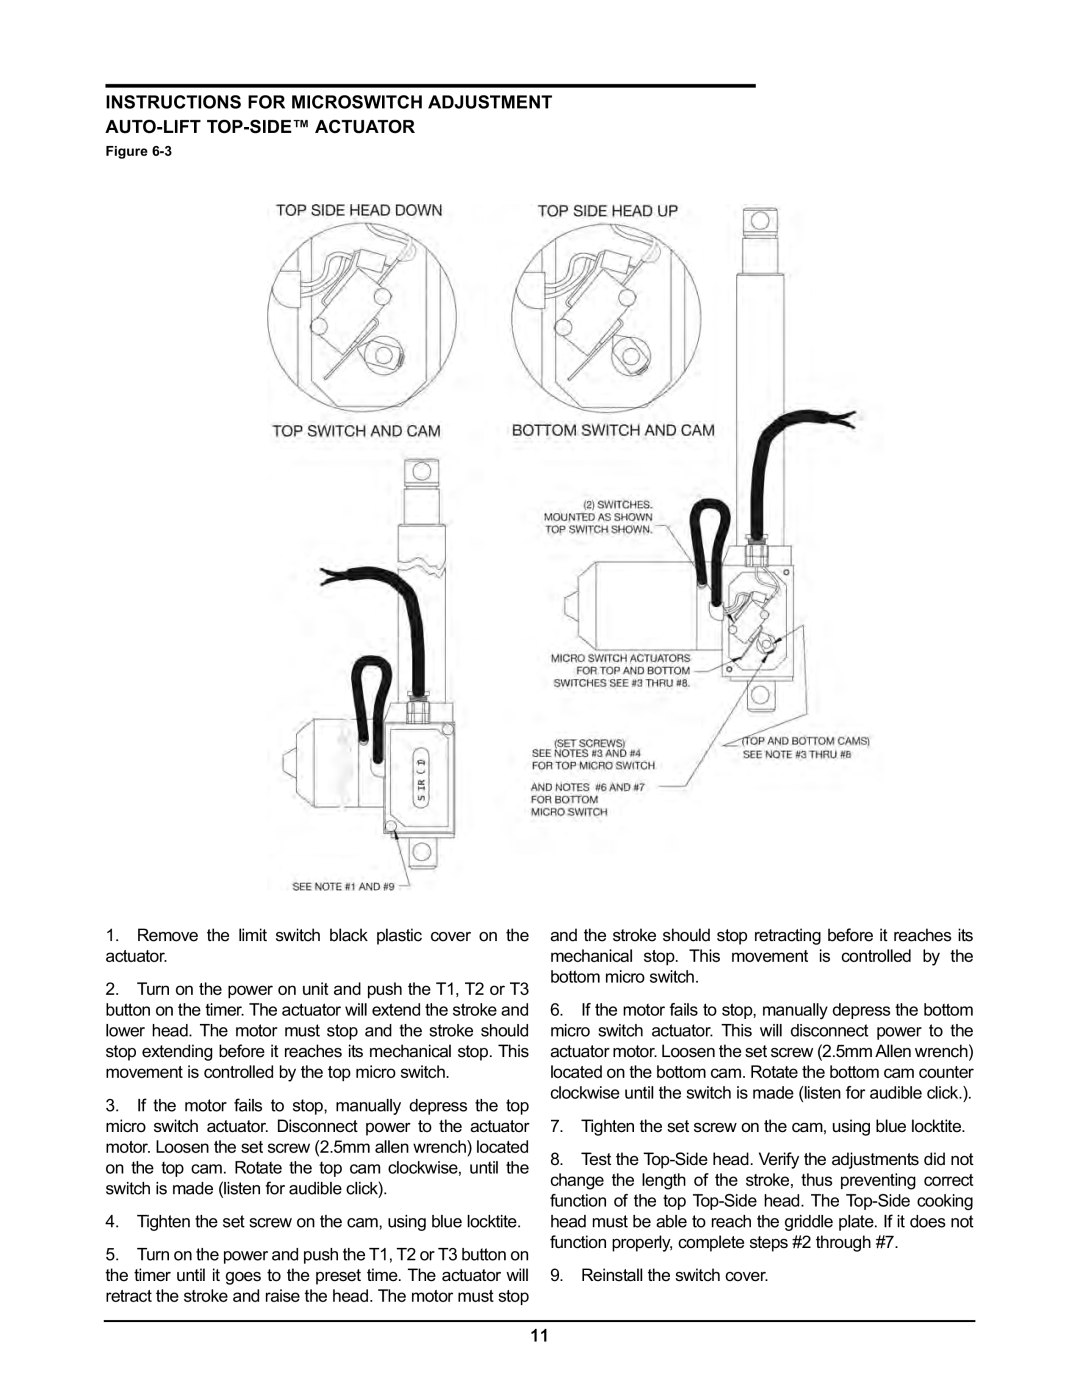 Keating Of Chicago 2005 user manual Reinstall the switch cover 